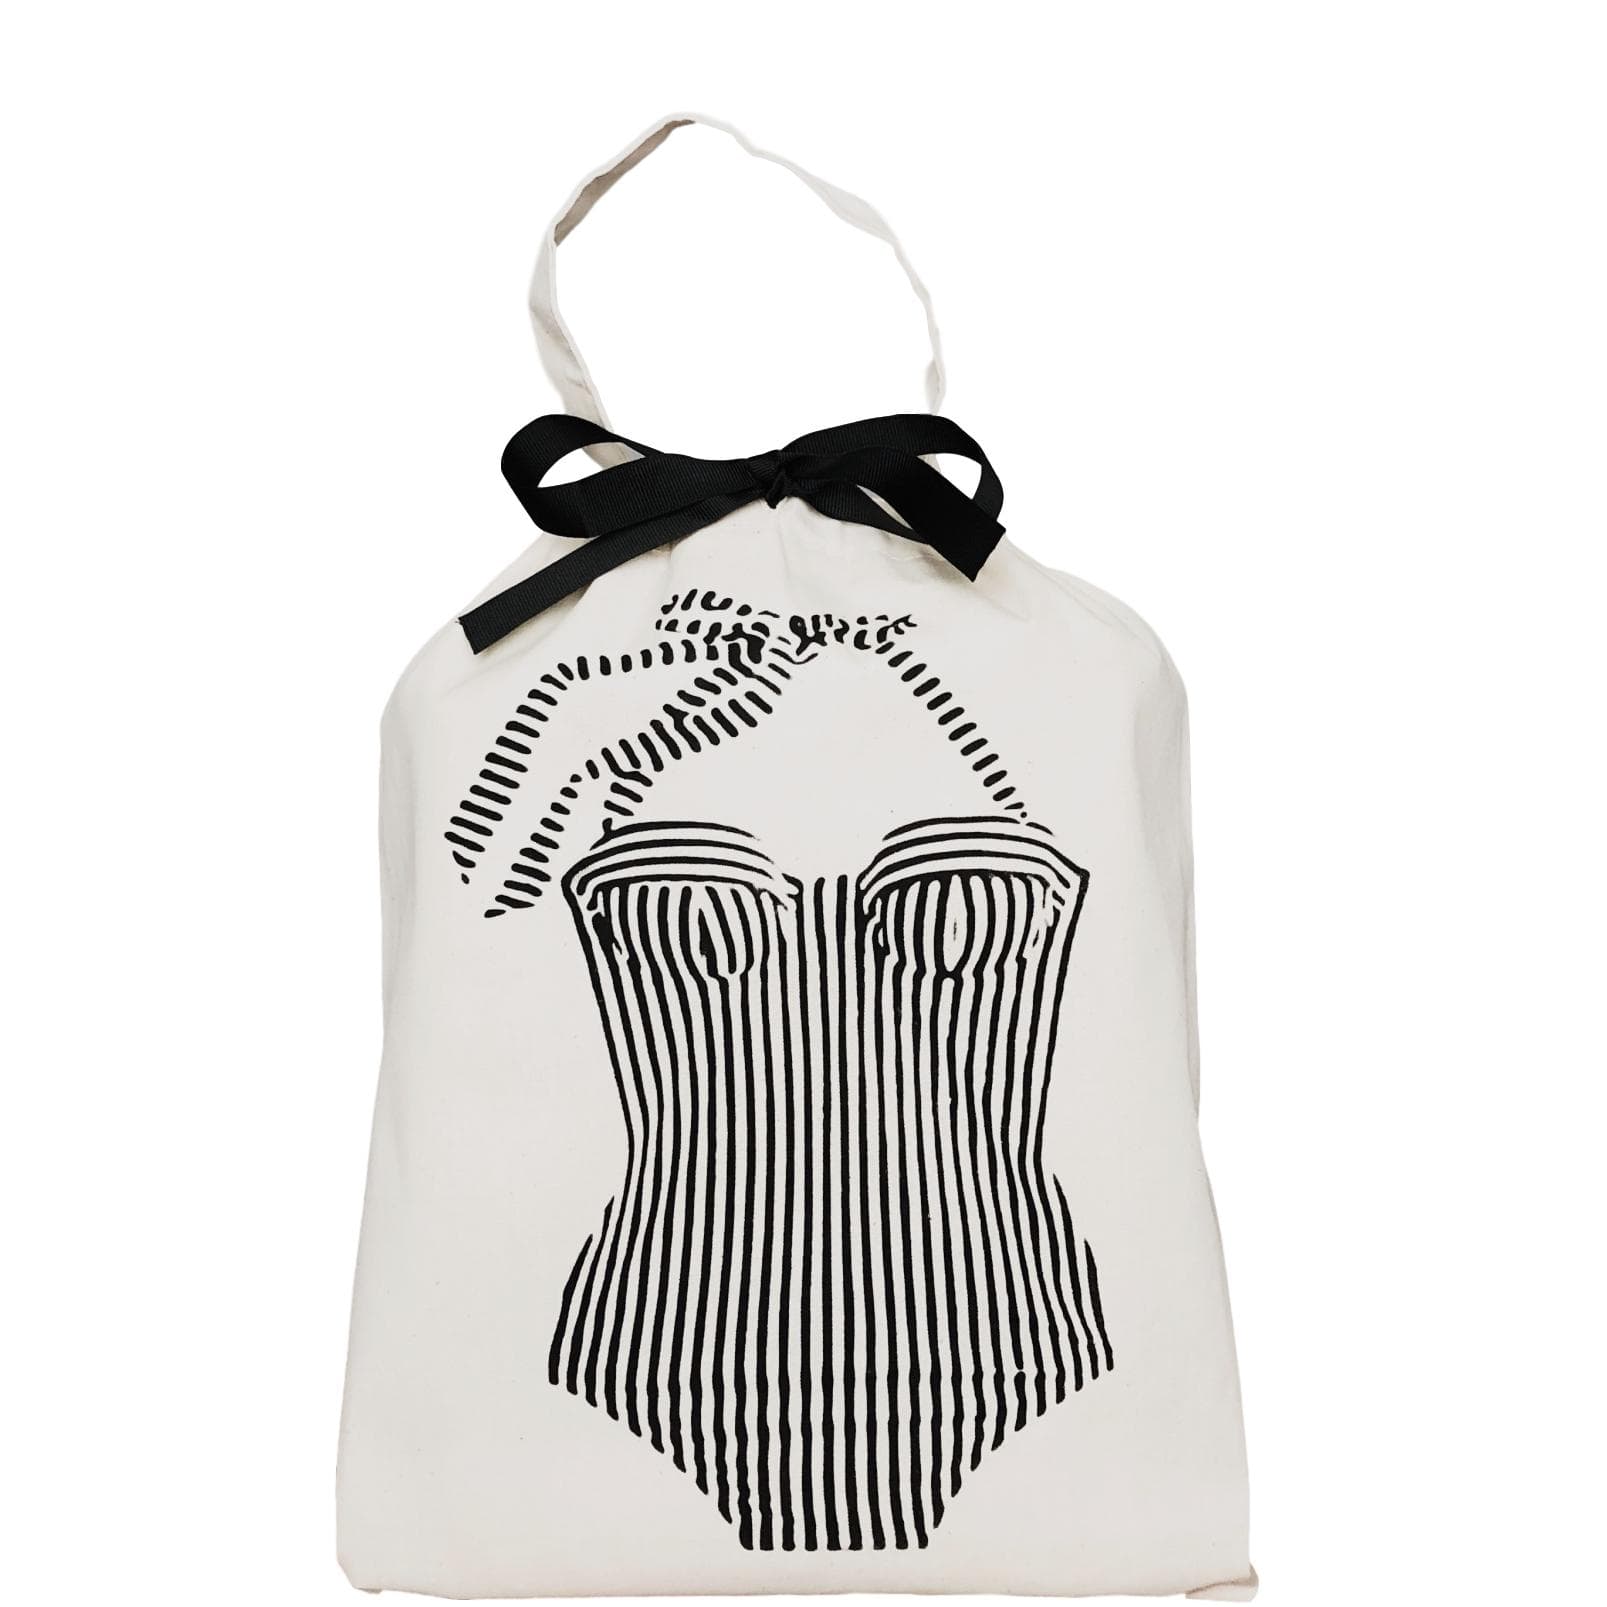 Bretagne Swimsuit Bag with a striped one piece swimsuit on the front and  a handle to carry.